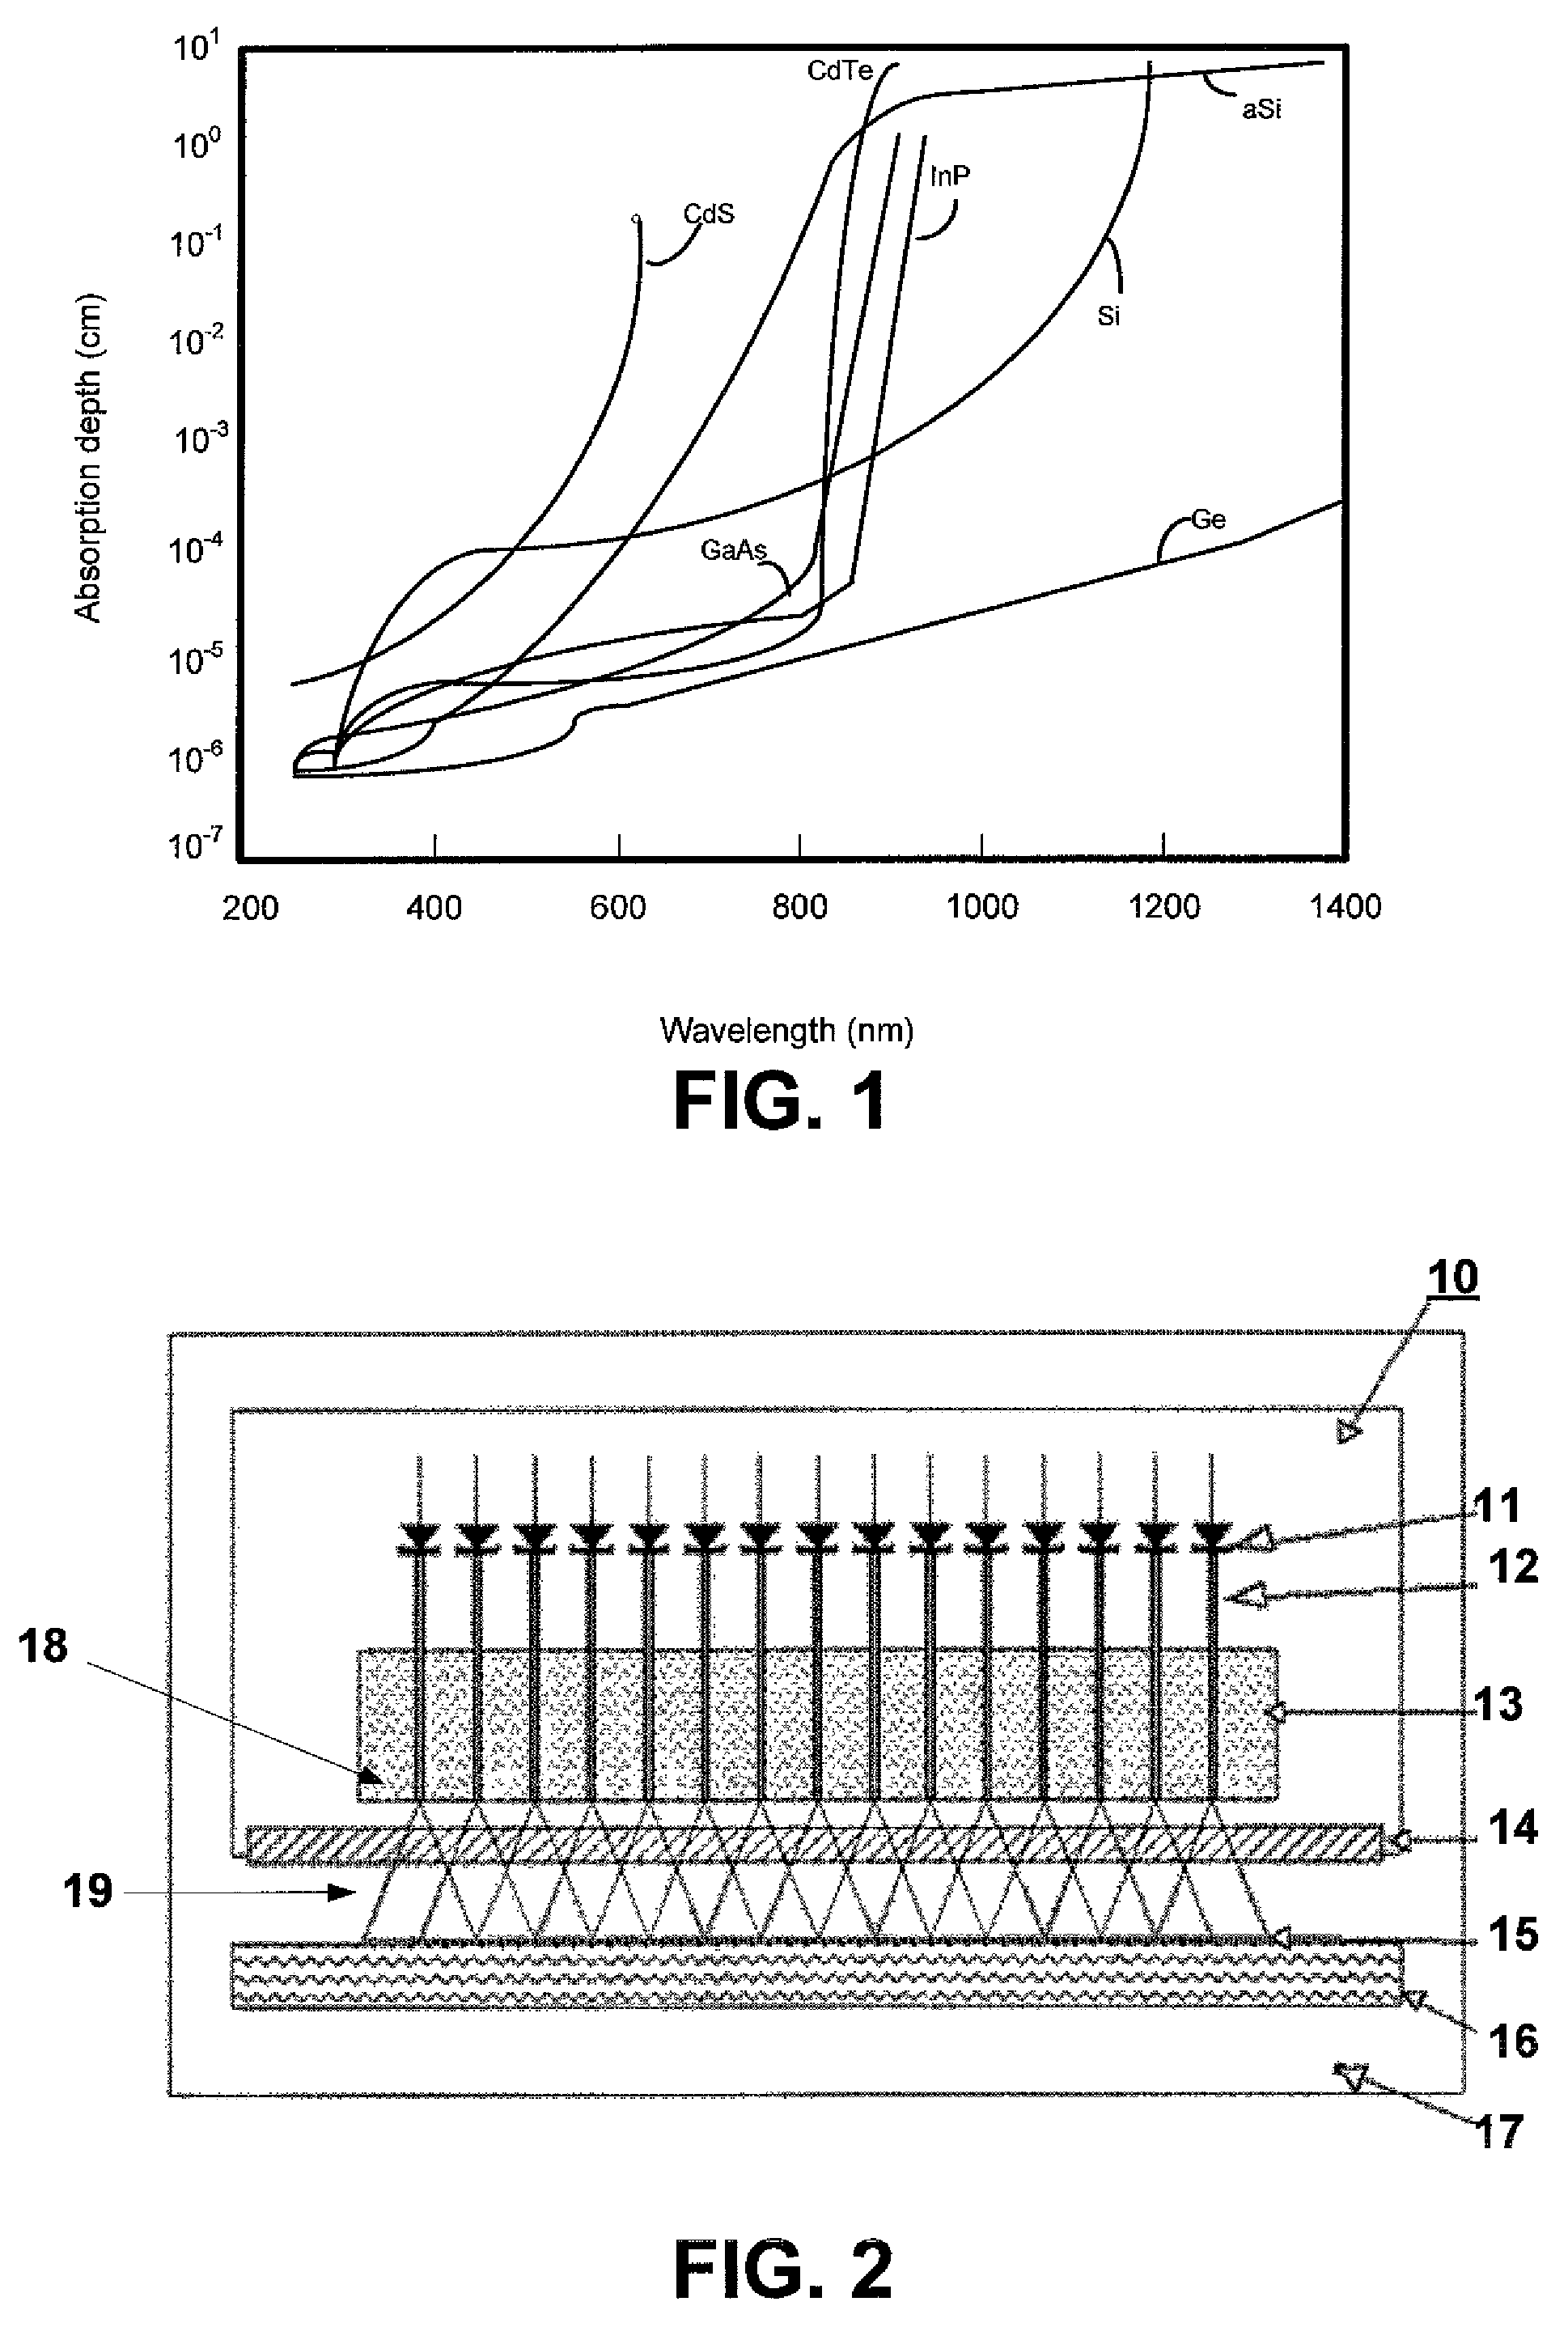 Laser diode array with fiber optic termination for surface treatment of materials